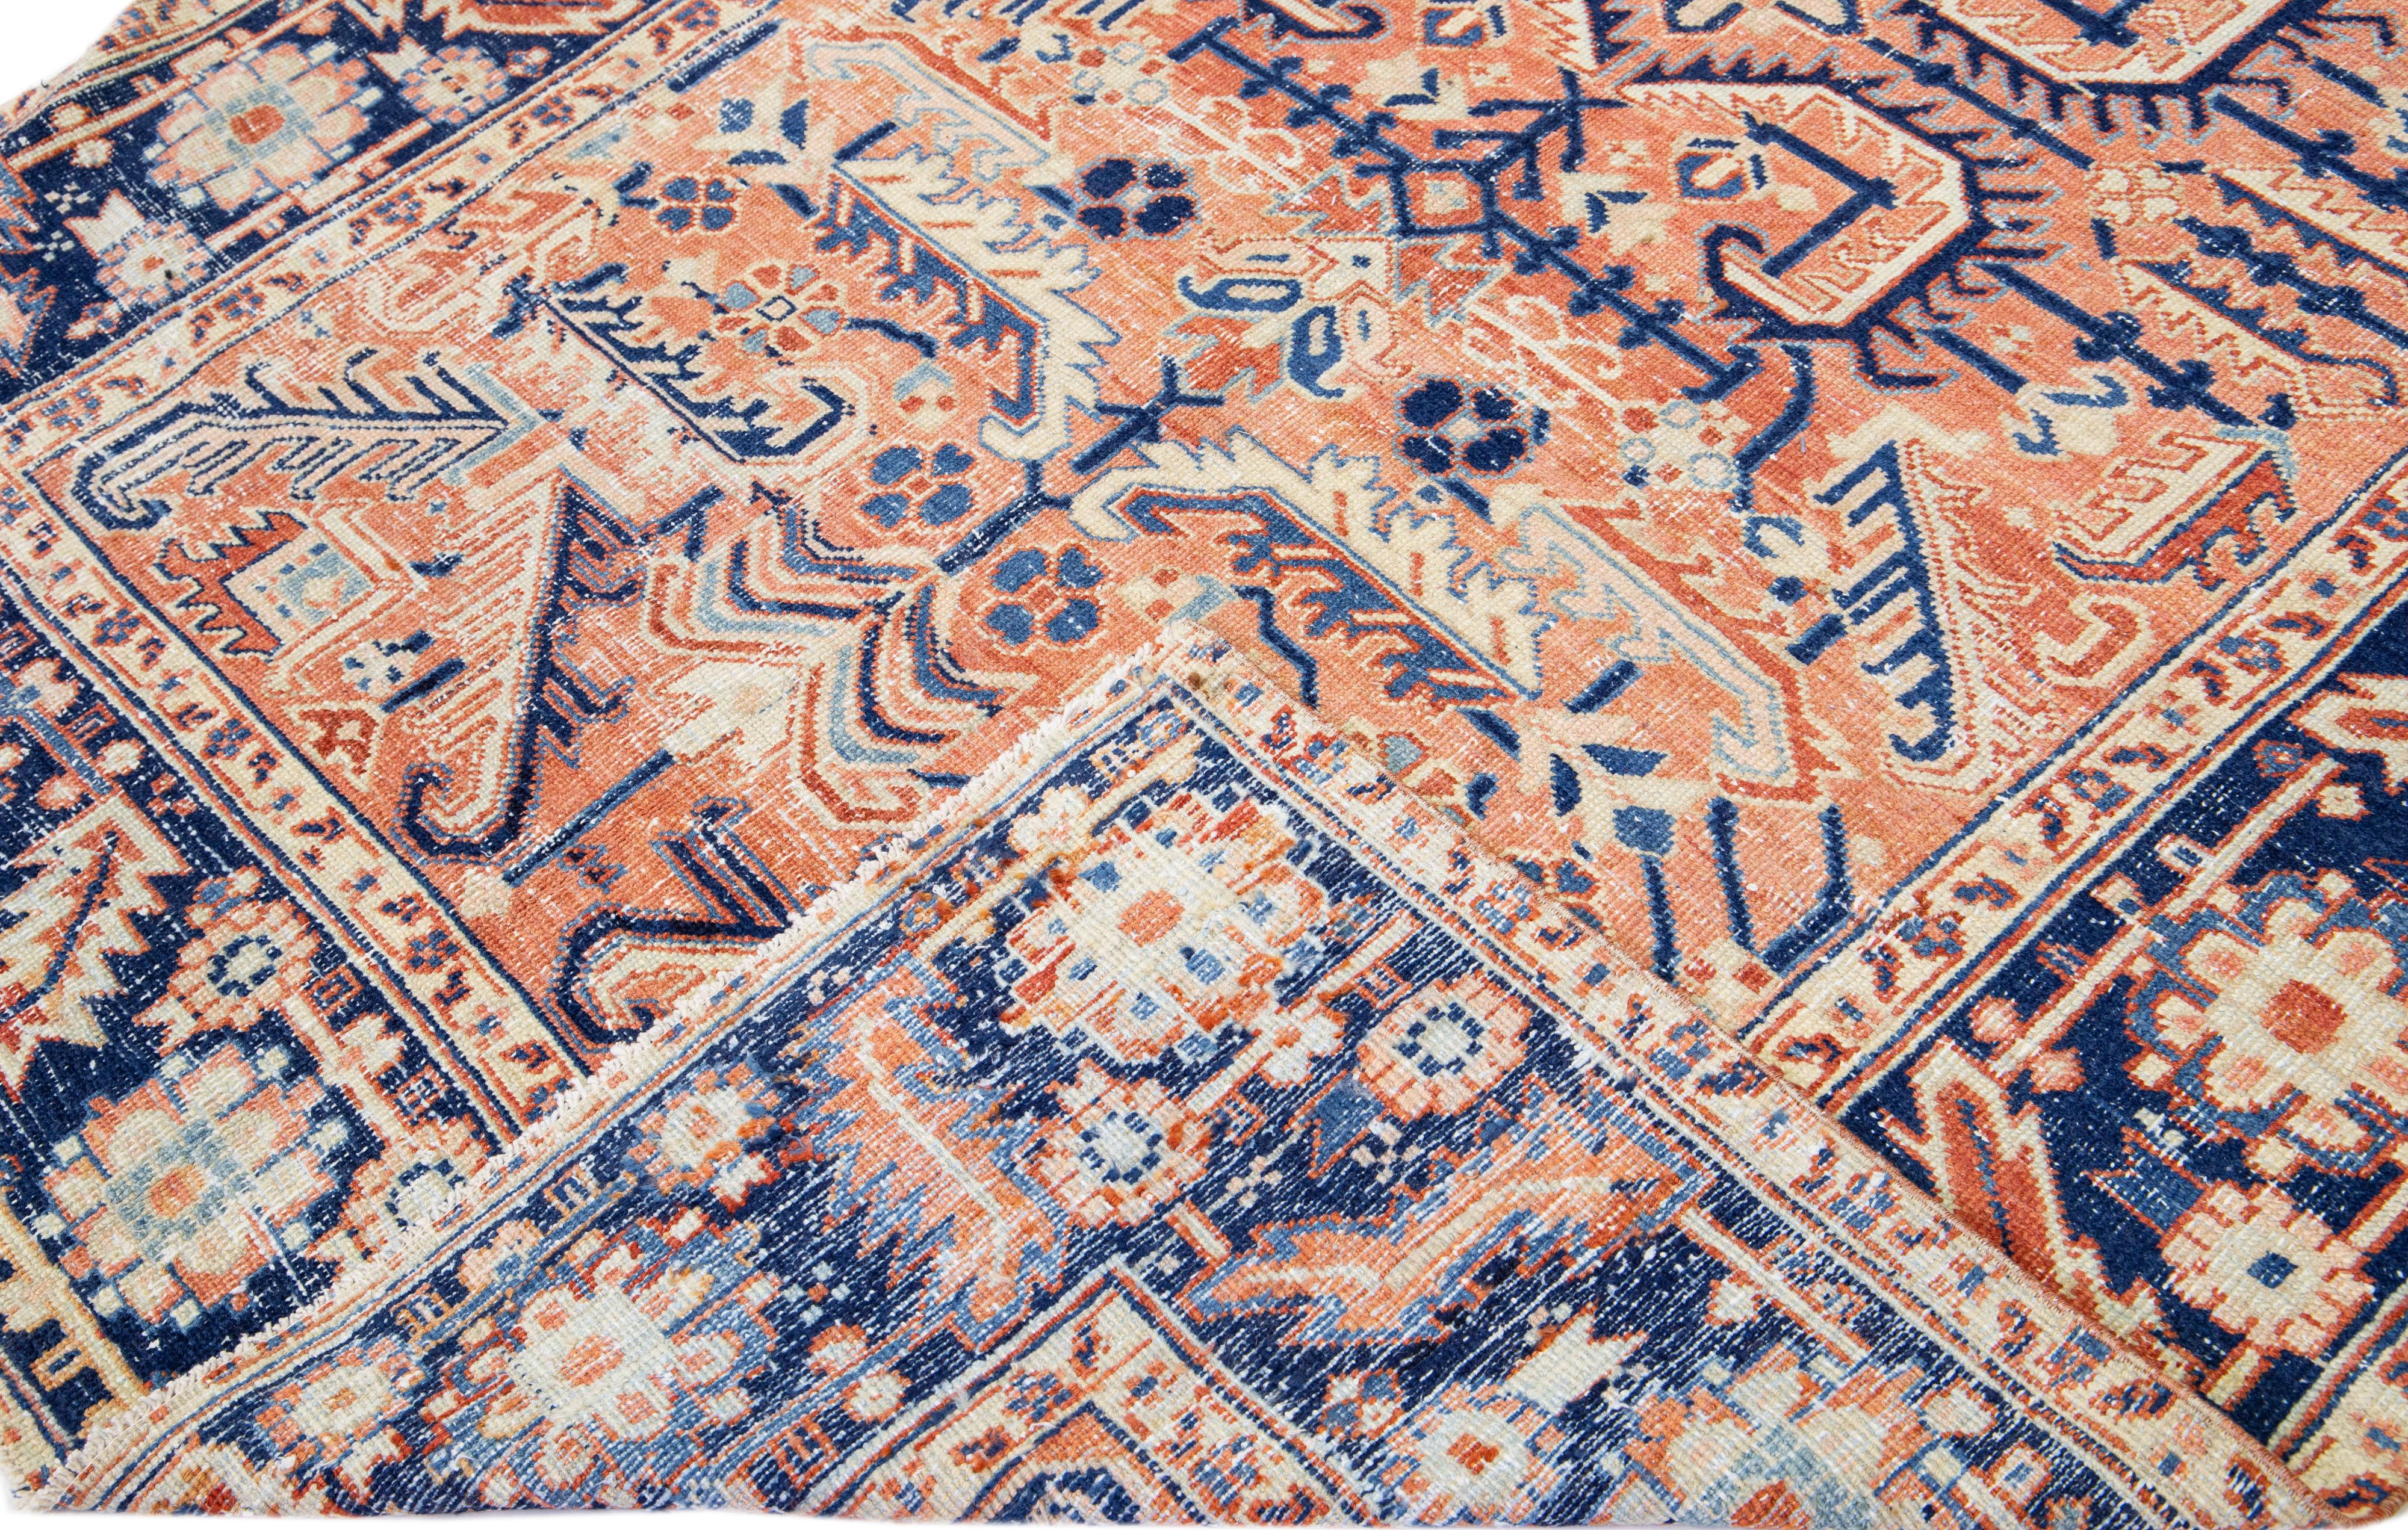 Beautiful antique Heriz hand-knotted wool rug with a peach color field. This Persian rug has a blue frame with beige and rust accents in a gorgeous all-over geometric medallion design.

This rug measures: 6'6